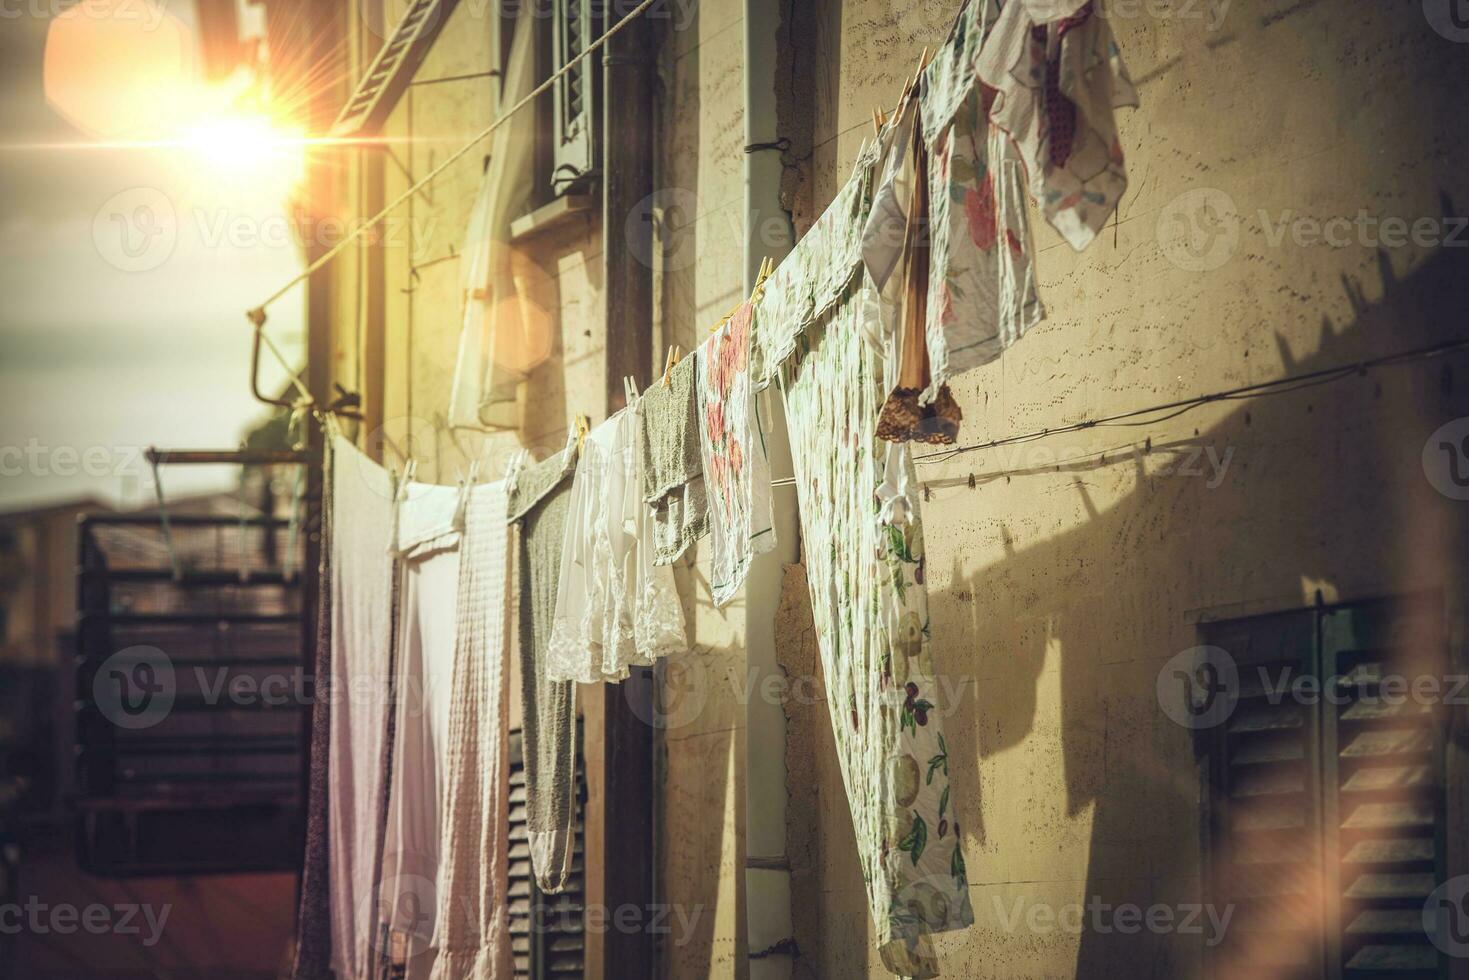 Air-Drying Clothing in the Italy photo